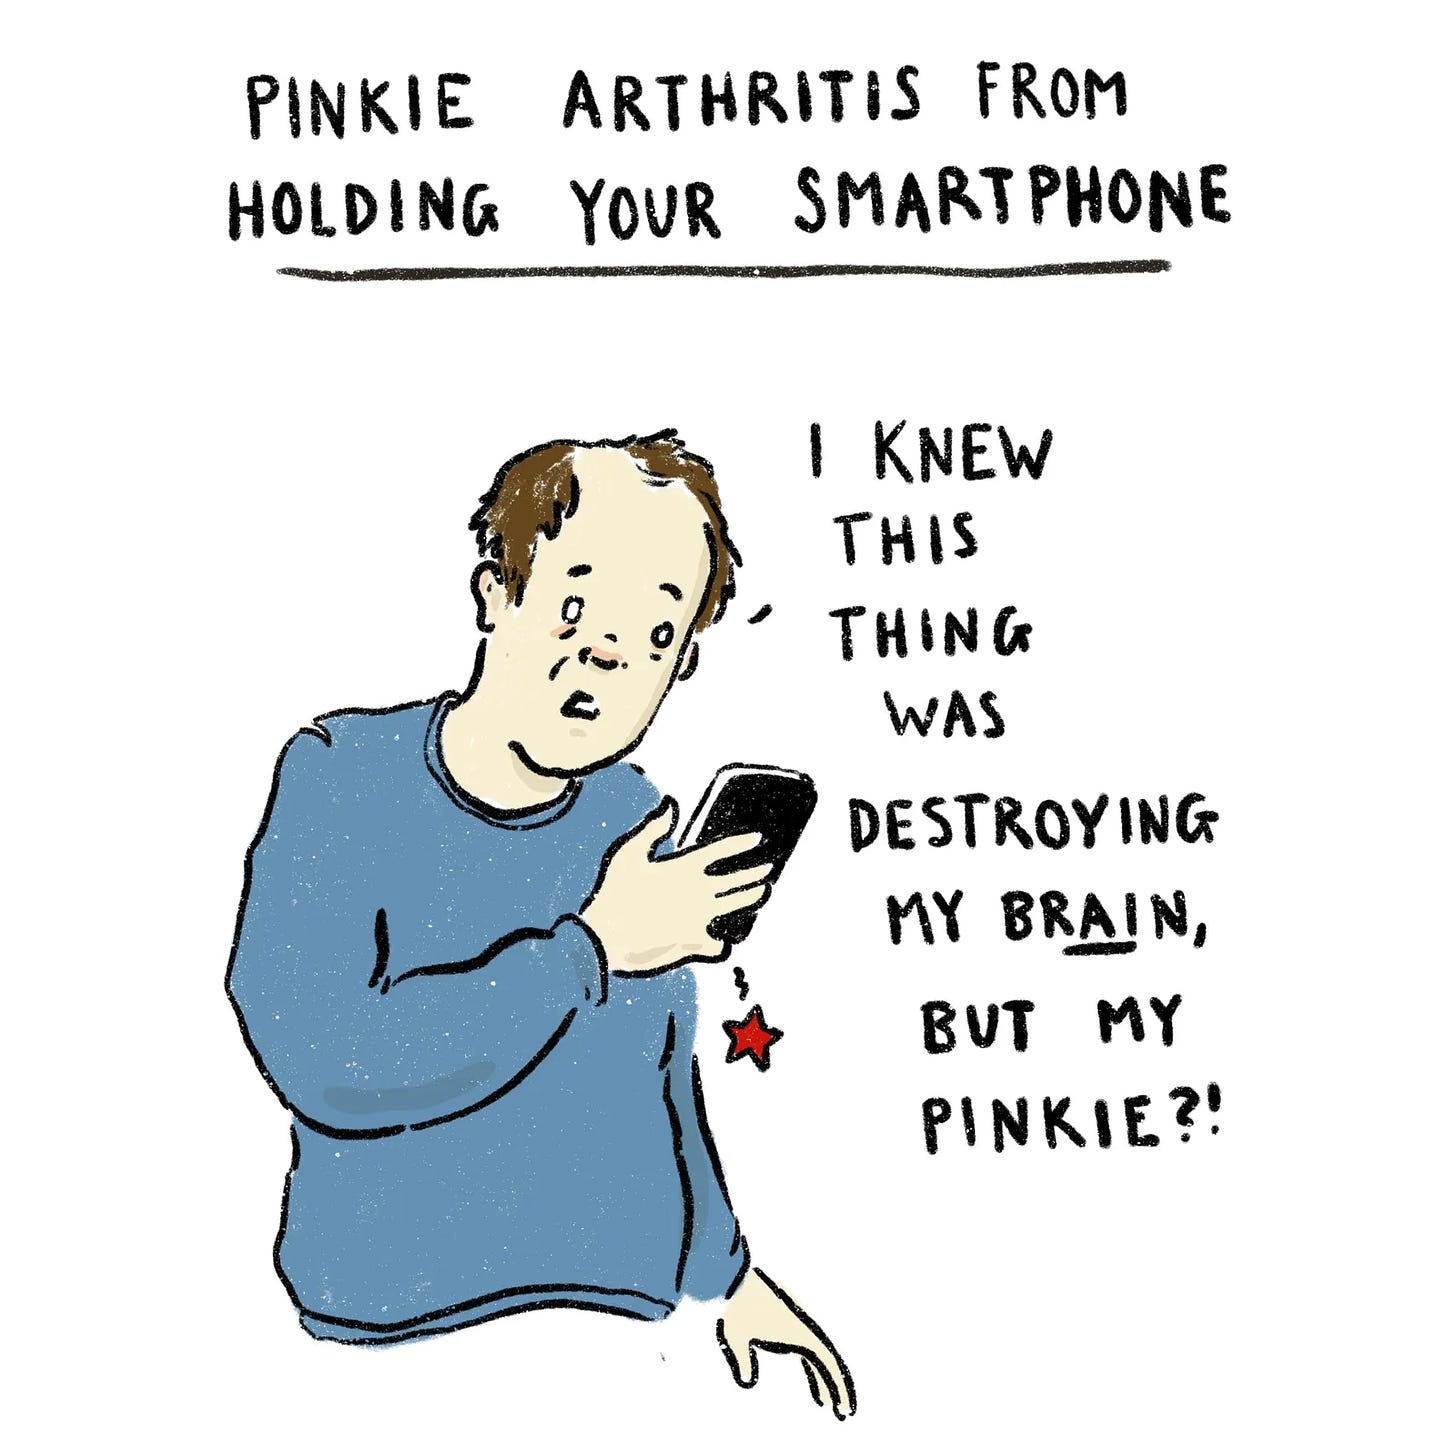 Cartoon of man holding his phone complaining that it's giving him arthritis in his pinkie finger.